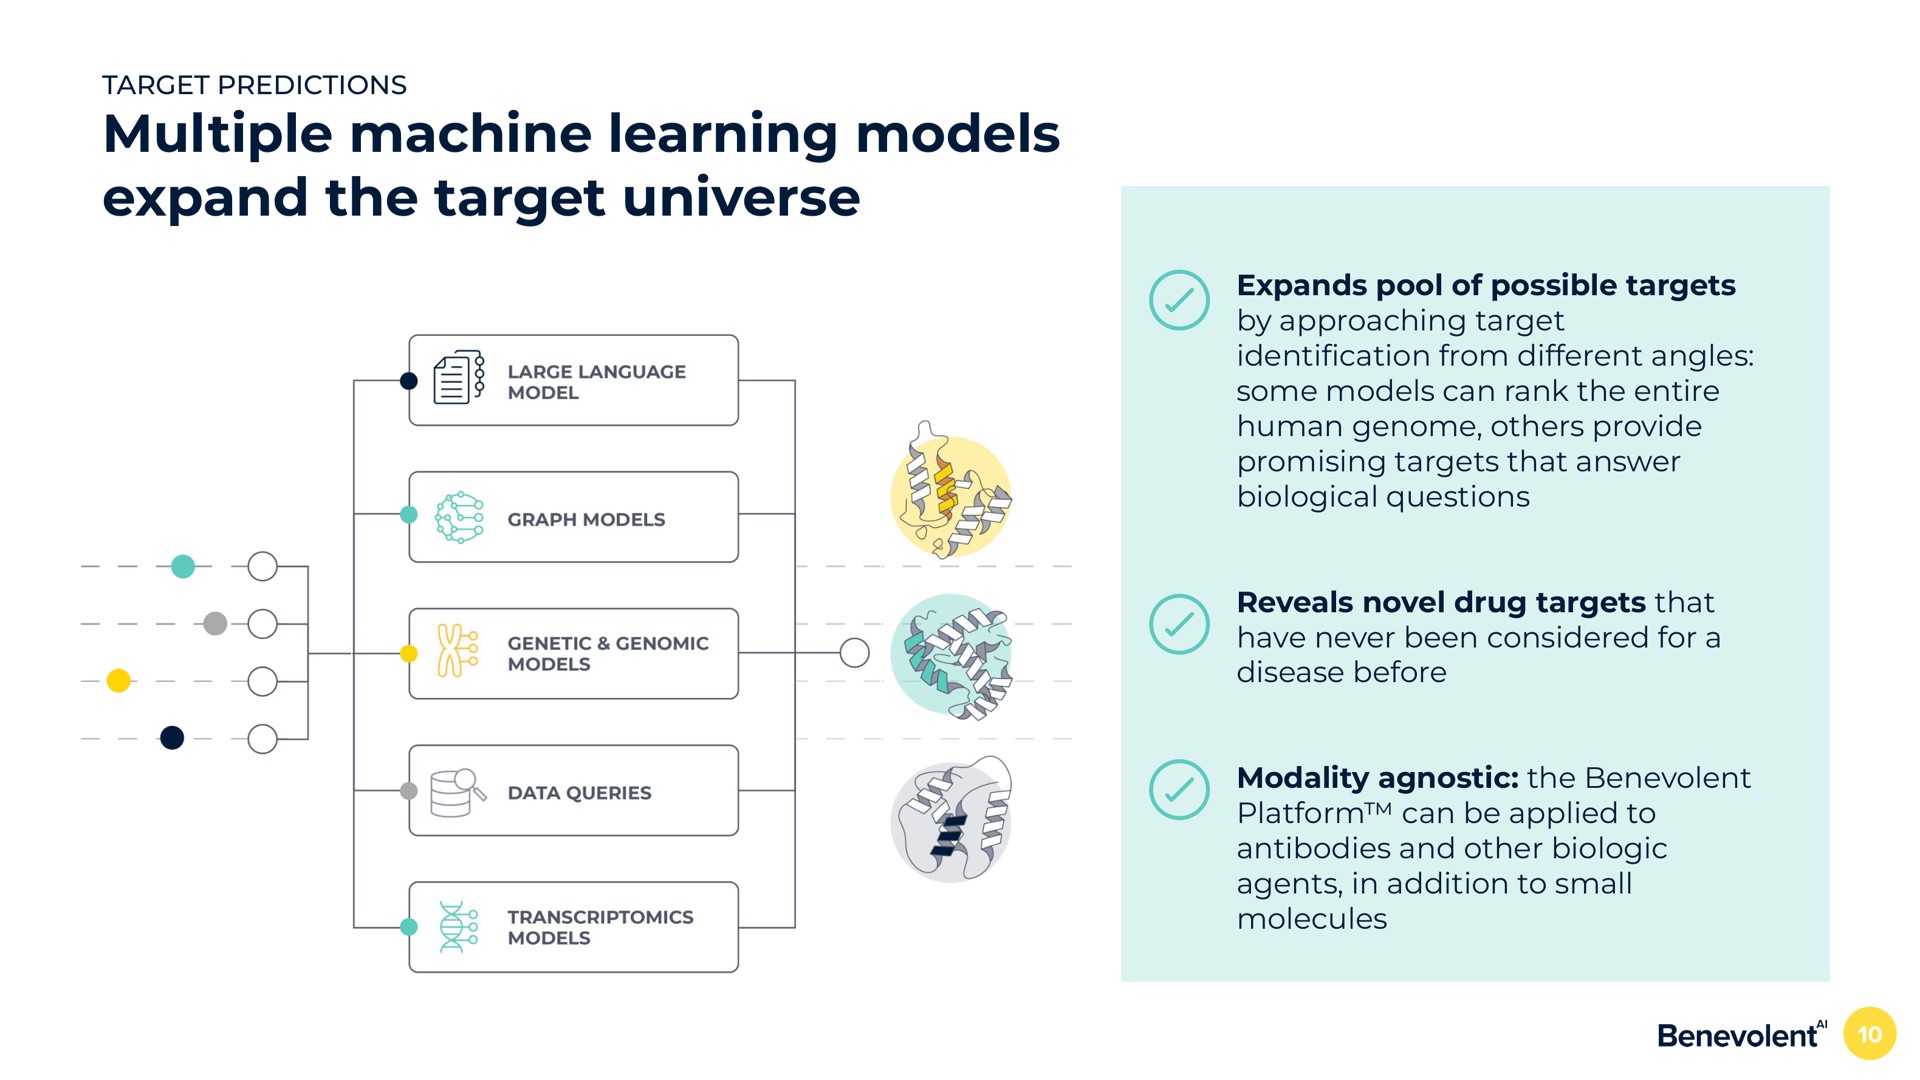 multiple machine learning models expand the target universe expands pool of possible targets by approaching target cation from different angles some models can rank the entire human genome provide promising targets that answer biological questions reveals novel drug targets that have never been considered for a disease before modality agnostic the benevolent platform can be applied to antibodies and other biologic agents in addition to small molecules | BenevolentAI